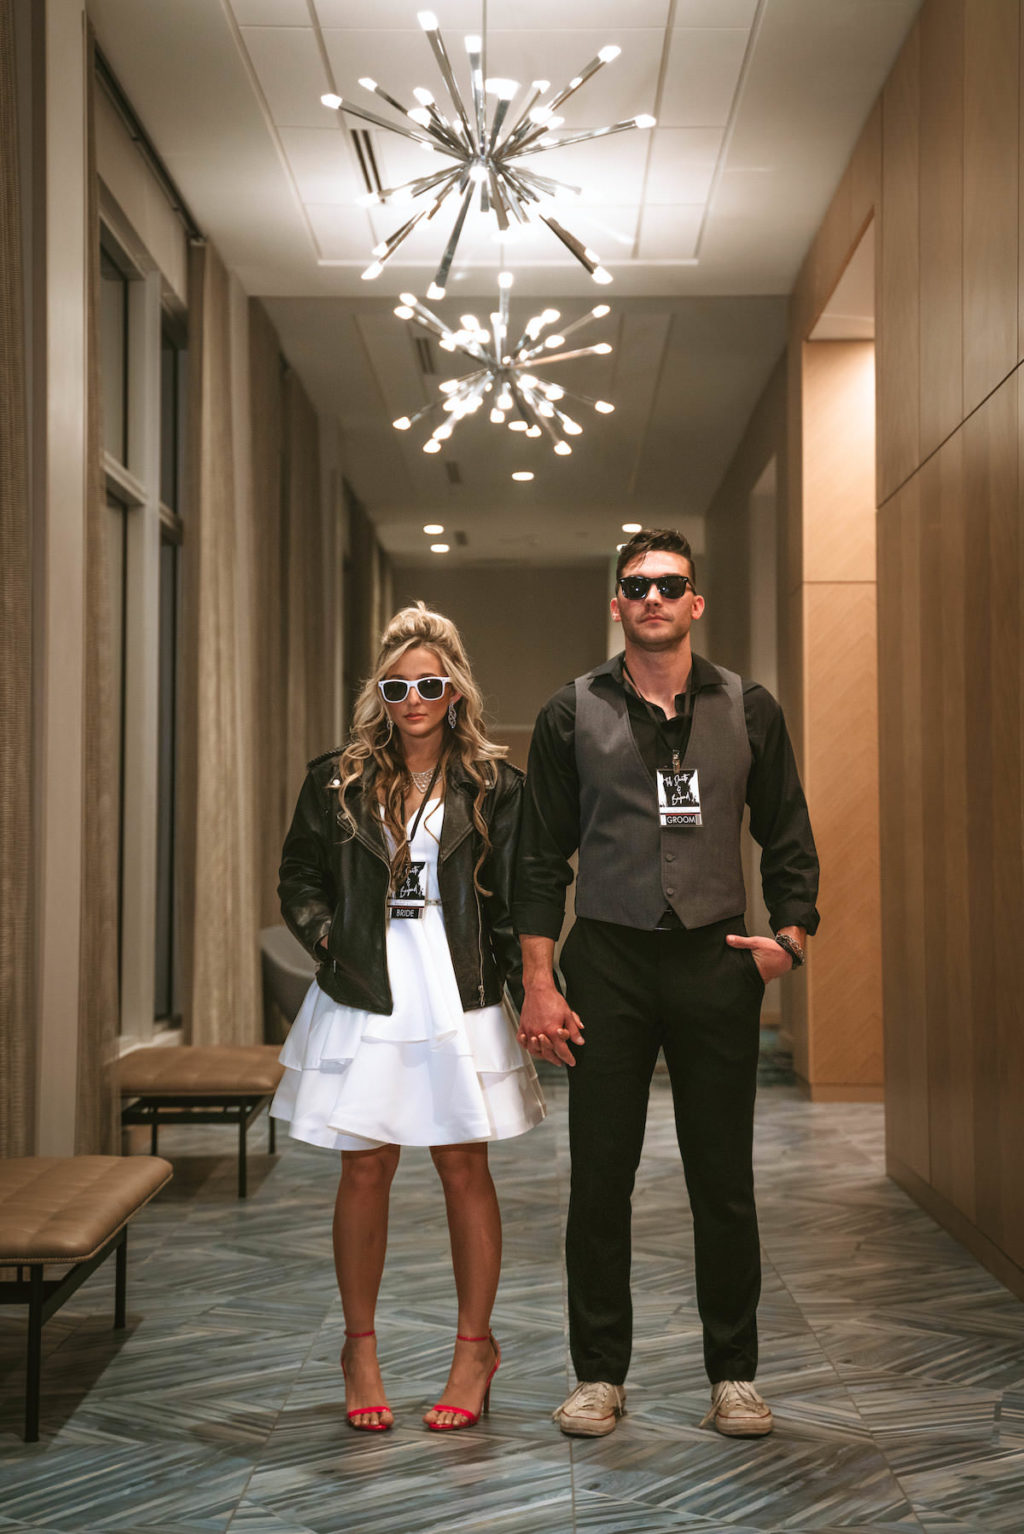 Urban and Edgy Bride in Short Wedding Dress with Black Leather Jacket and Red Shoes, Groom in Black Dress Pants and Shirt with Gray Vest and Sunglasses | Tampa Bay Wedding Photographer Bonnie Newman Creative | Wedding Hair and Makeup Adore Bridal Service | Wedding Dress Truly Forever Bridal | Aloft/ Element Midtown Tampa